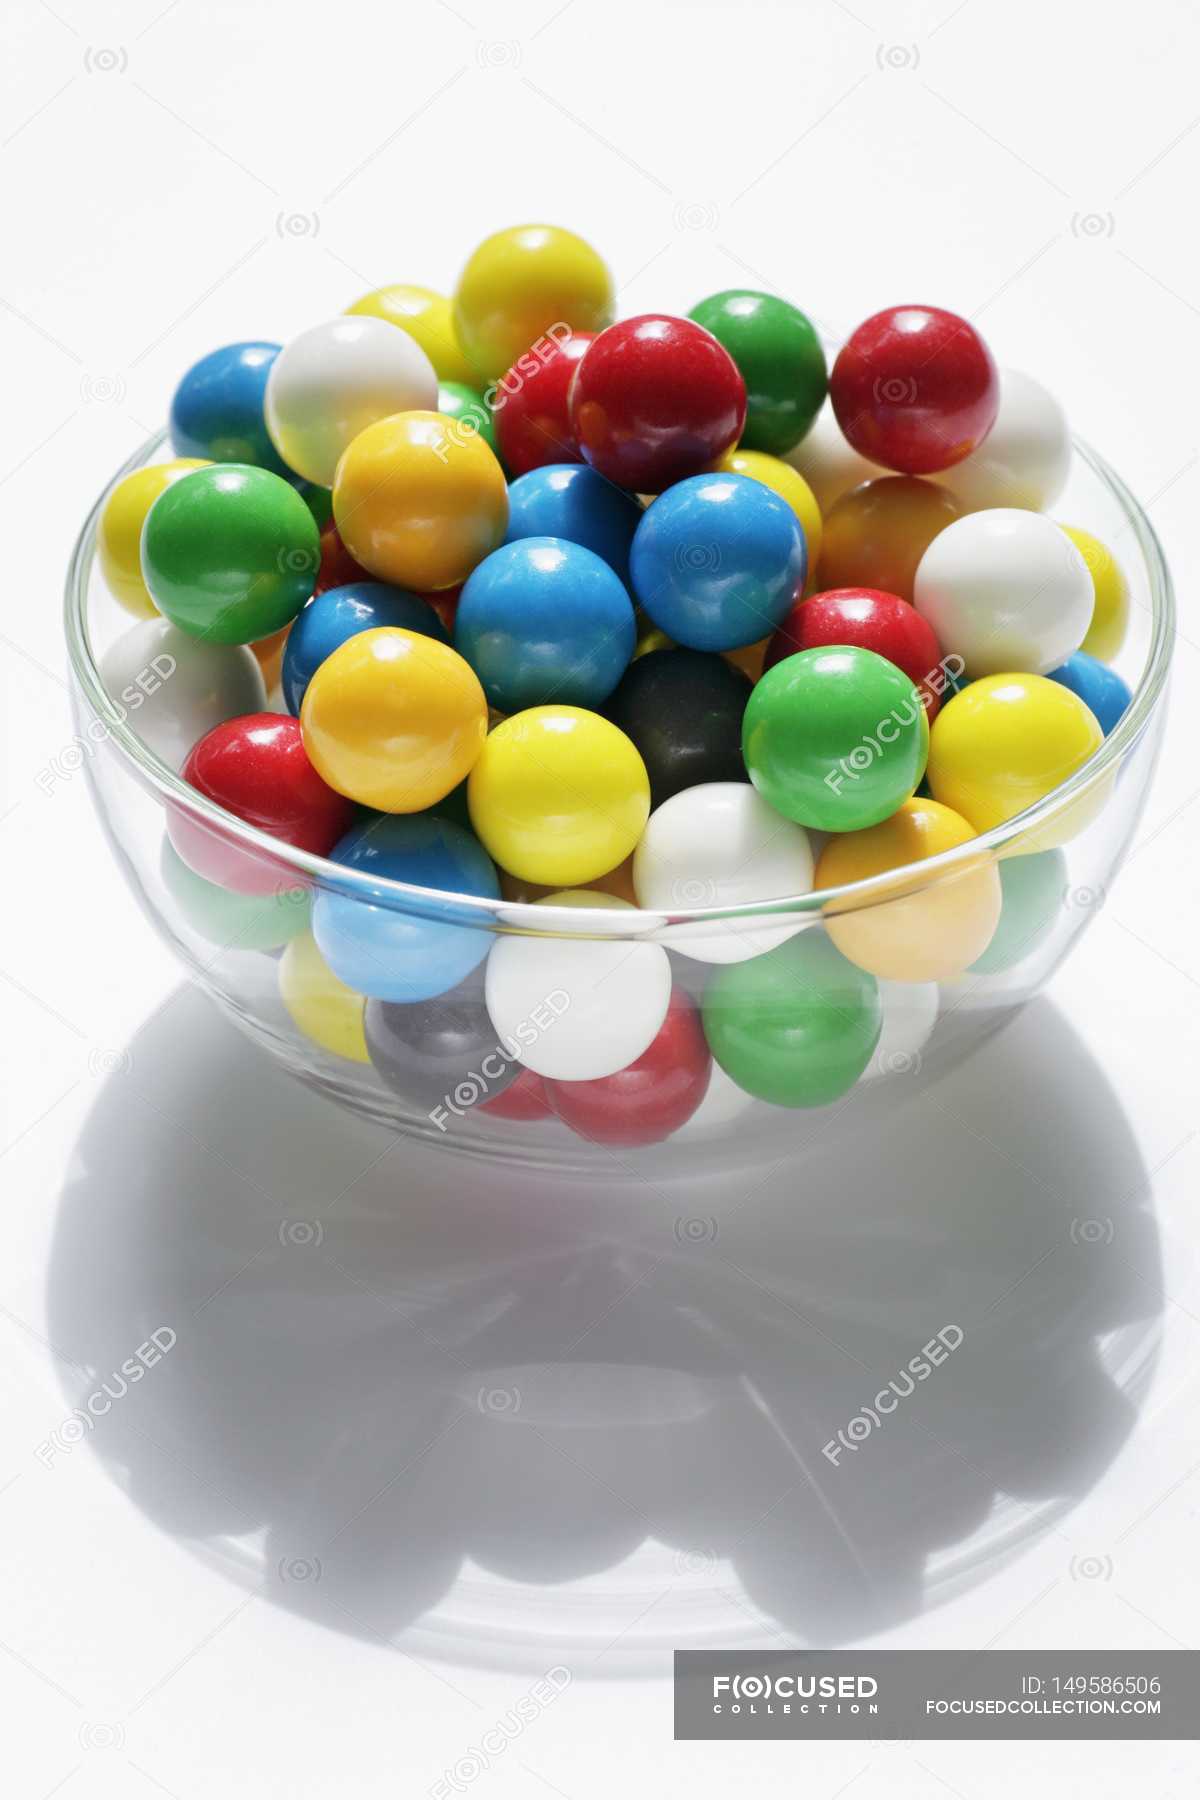 Closeup View Of Colored Chewing Gum Balls In Glass Bowl Diet Background Stock Photo 149586506